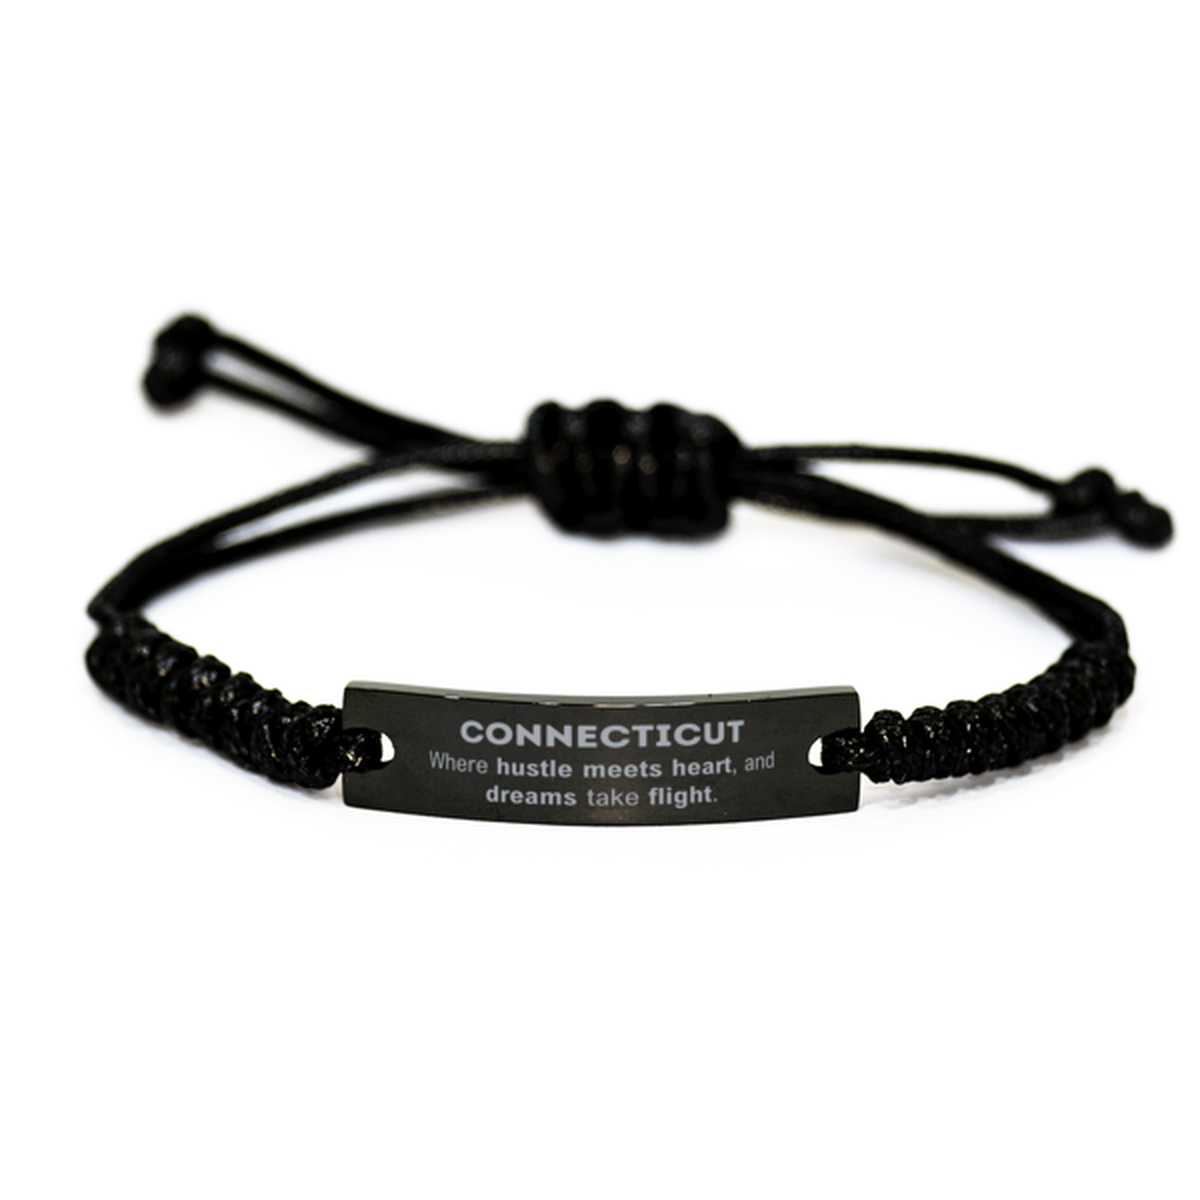 Connecticut: Where hustle meets heart, and dreams take flight, Connecticut Gifts, Proud Connecticut Christmas Birthday Connecticut Black Rope Bracelet, Connecticut State People, Men, Women, Friends